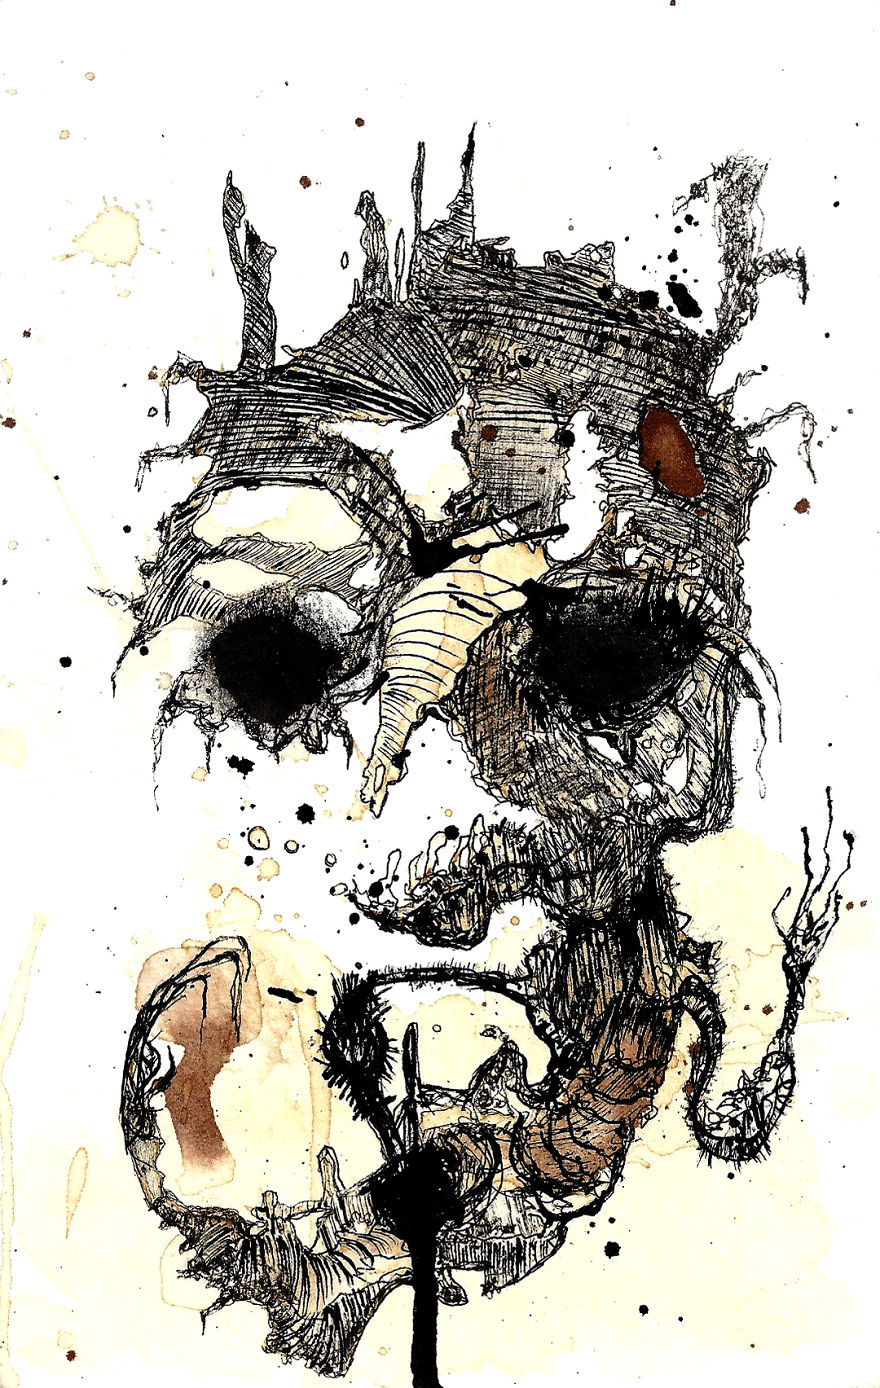 Artist Draws Cute And Creepy Monsters On Coffee-Stained Paper